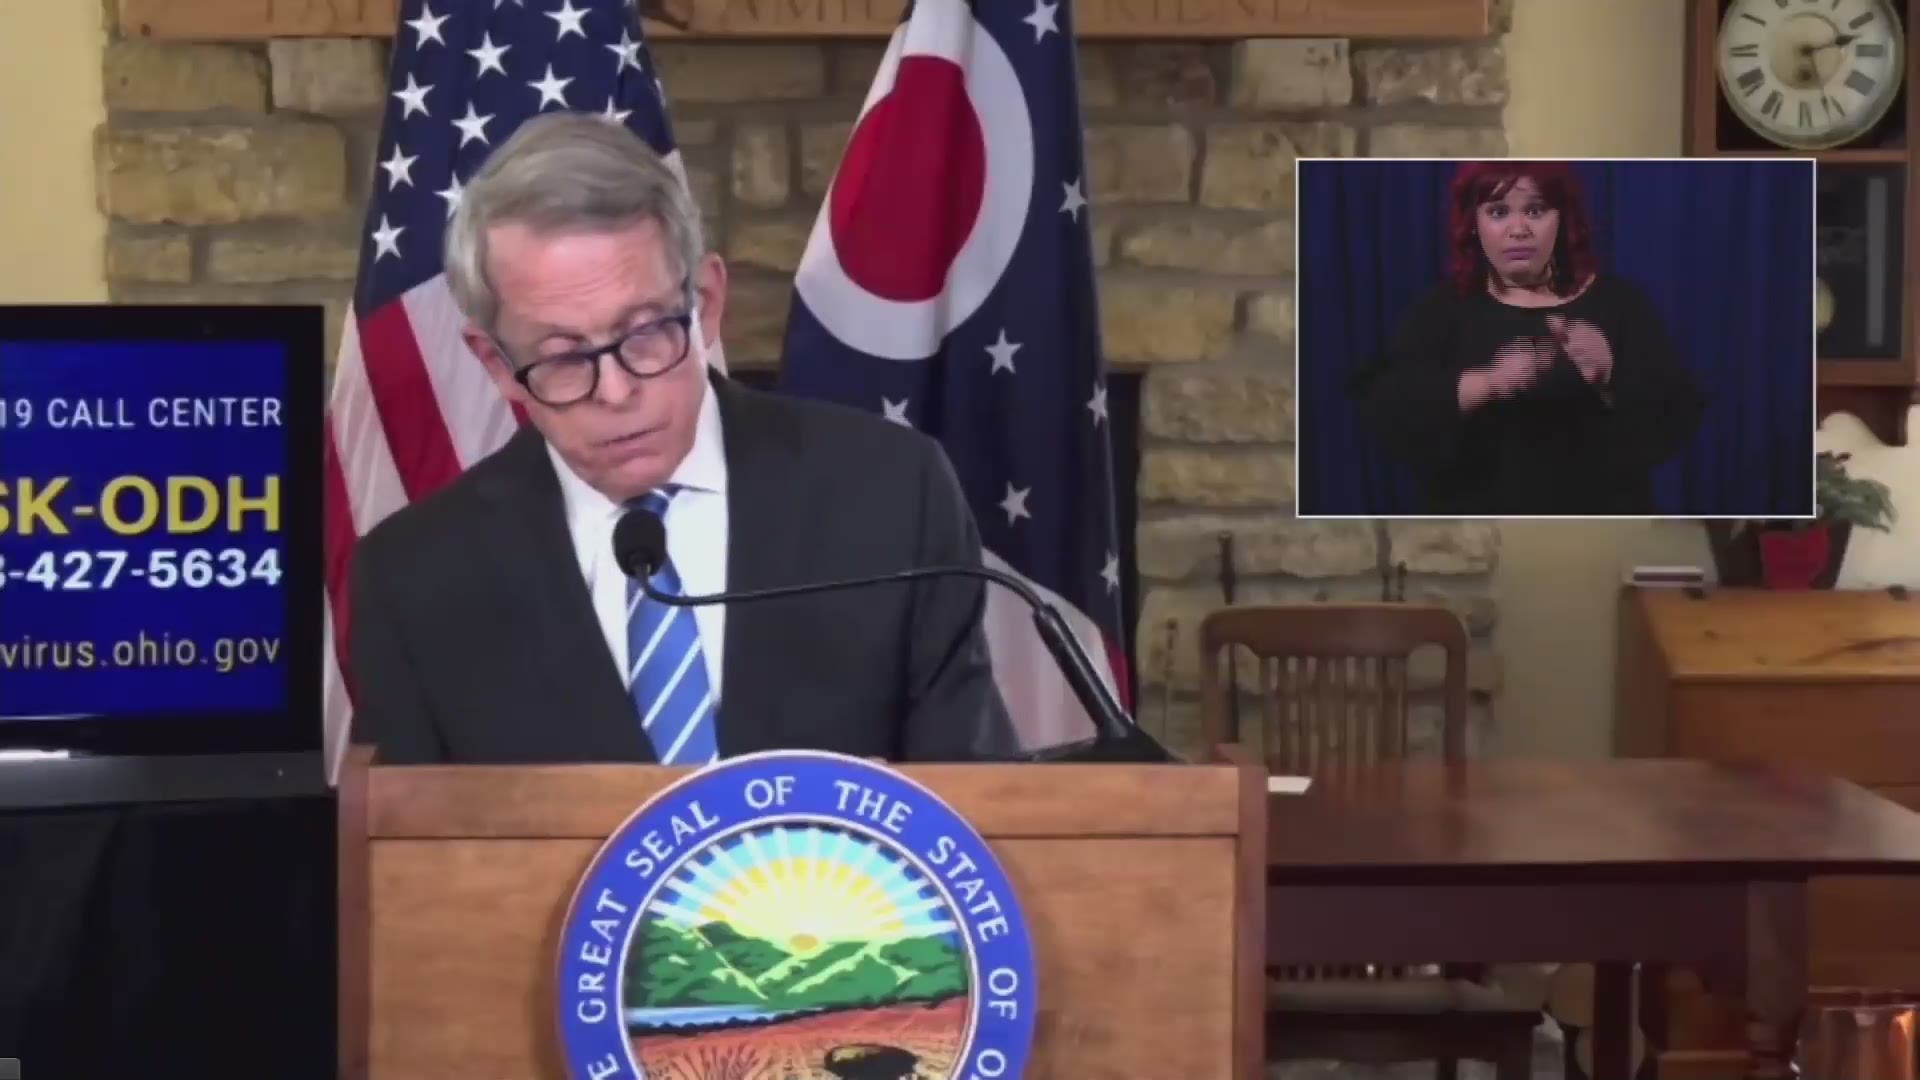 Ohio adds 7,271 new COVID-19 cases, 109 deaths. DeWine will extend overnight curfew.